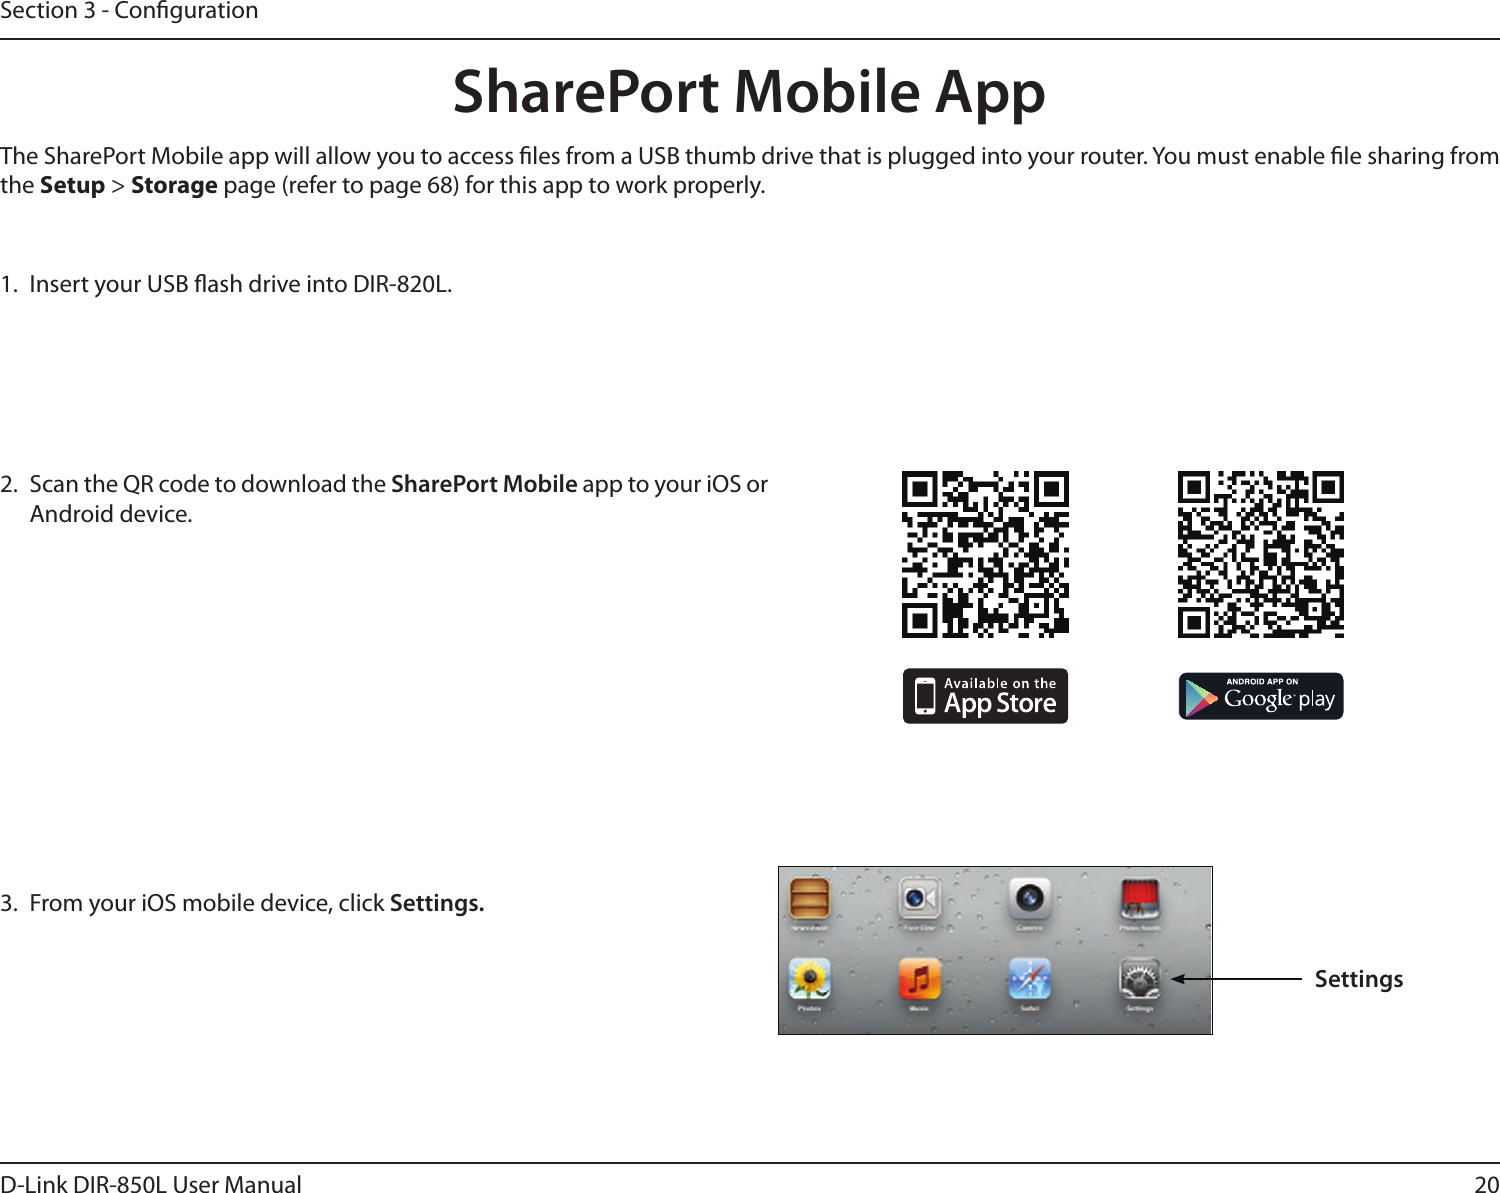 20D-Link DIR-850L User ManualSection 3 - Conguration1.  Insert your USB ash drive into DIR-820L.2.  Scan the QR code to download the SharePort Mobile app to your iOS or Android device.SharePort Mobile App3.  From your iOS mobile device, click Settings. The SharePort Mobile app will allow you to access les from a USB thumb drive that is plugged into your router. You must enable le sharing from the Setup &gt; Storage page (refer to page 68) for this app to work properly.Settings